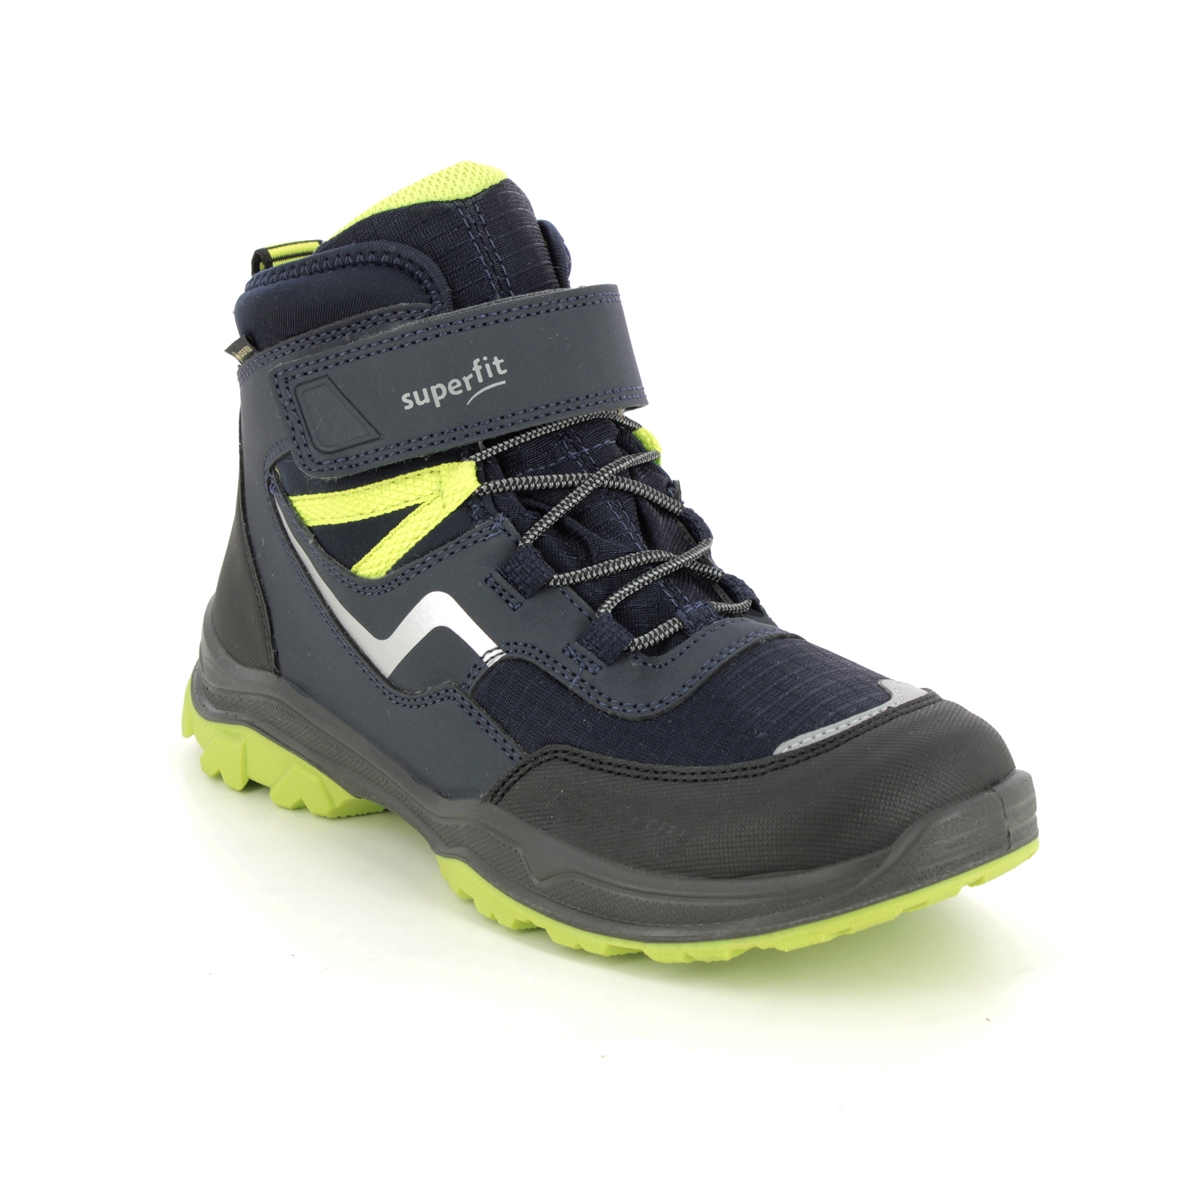 Superfit Jupiter Bungee Gtx Navy Lime Kids boys boots 1000074-8000 in a Plain Man-made in Size 36